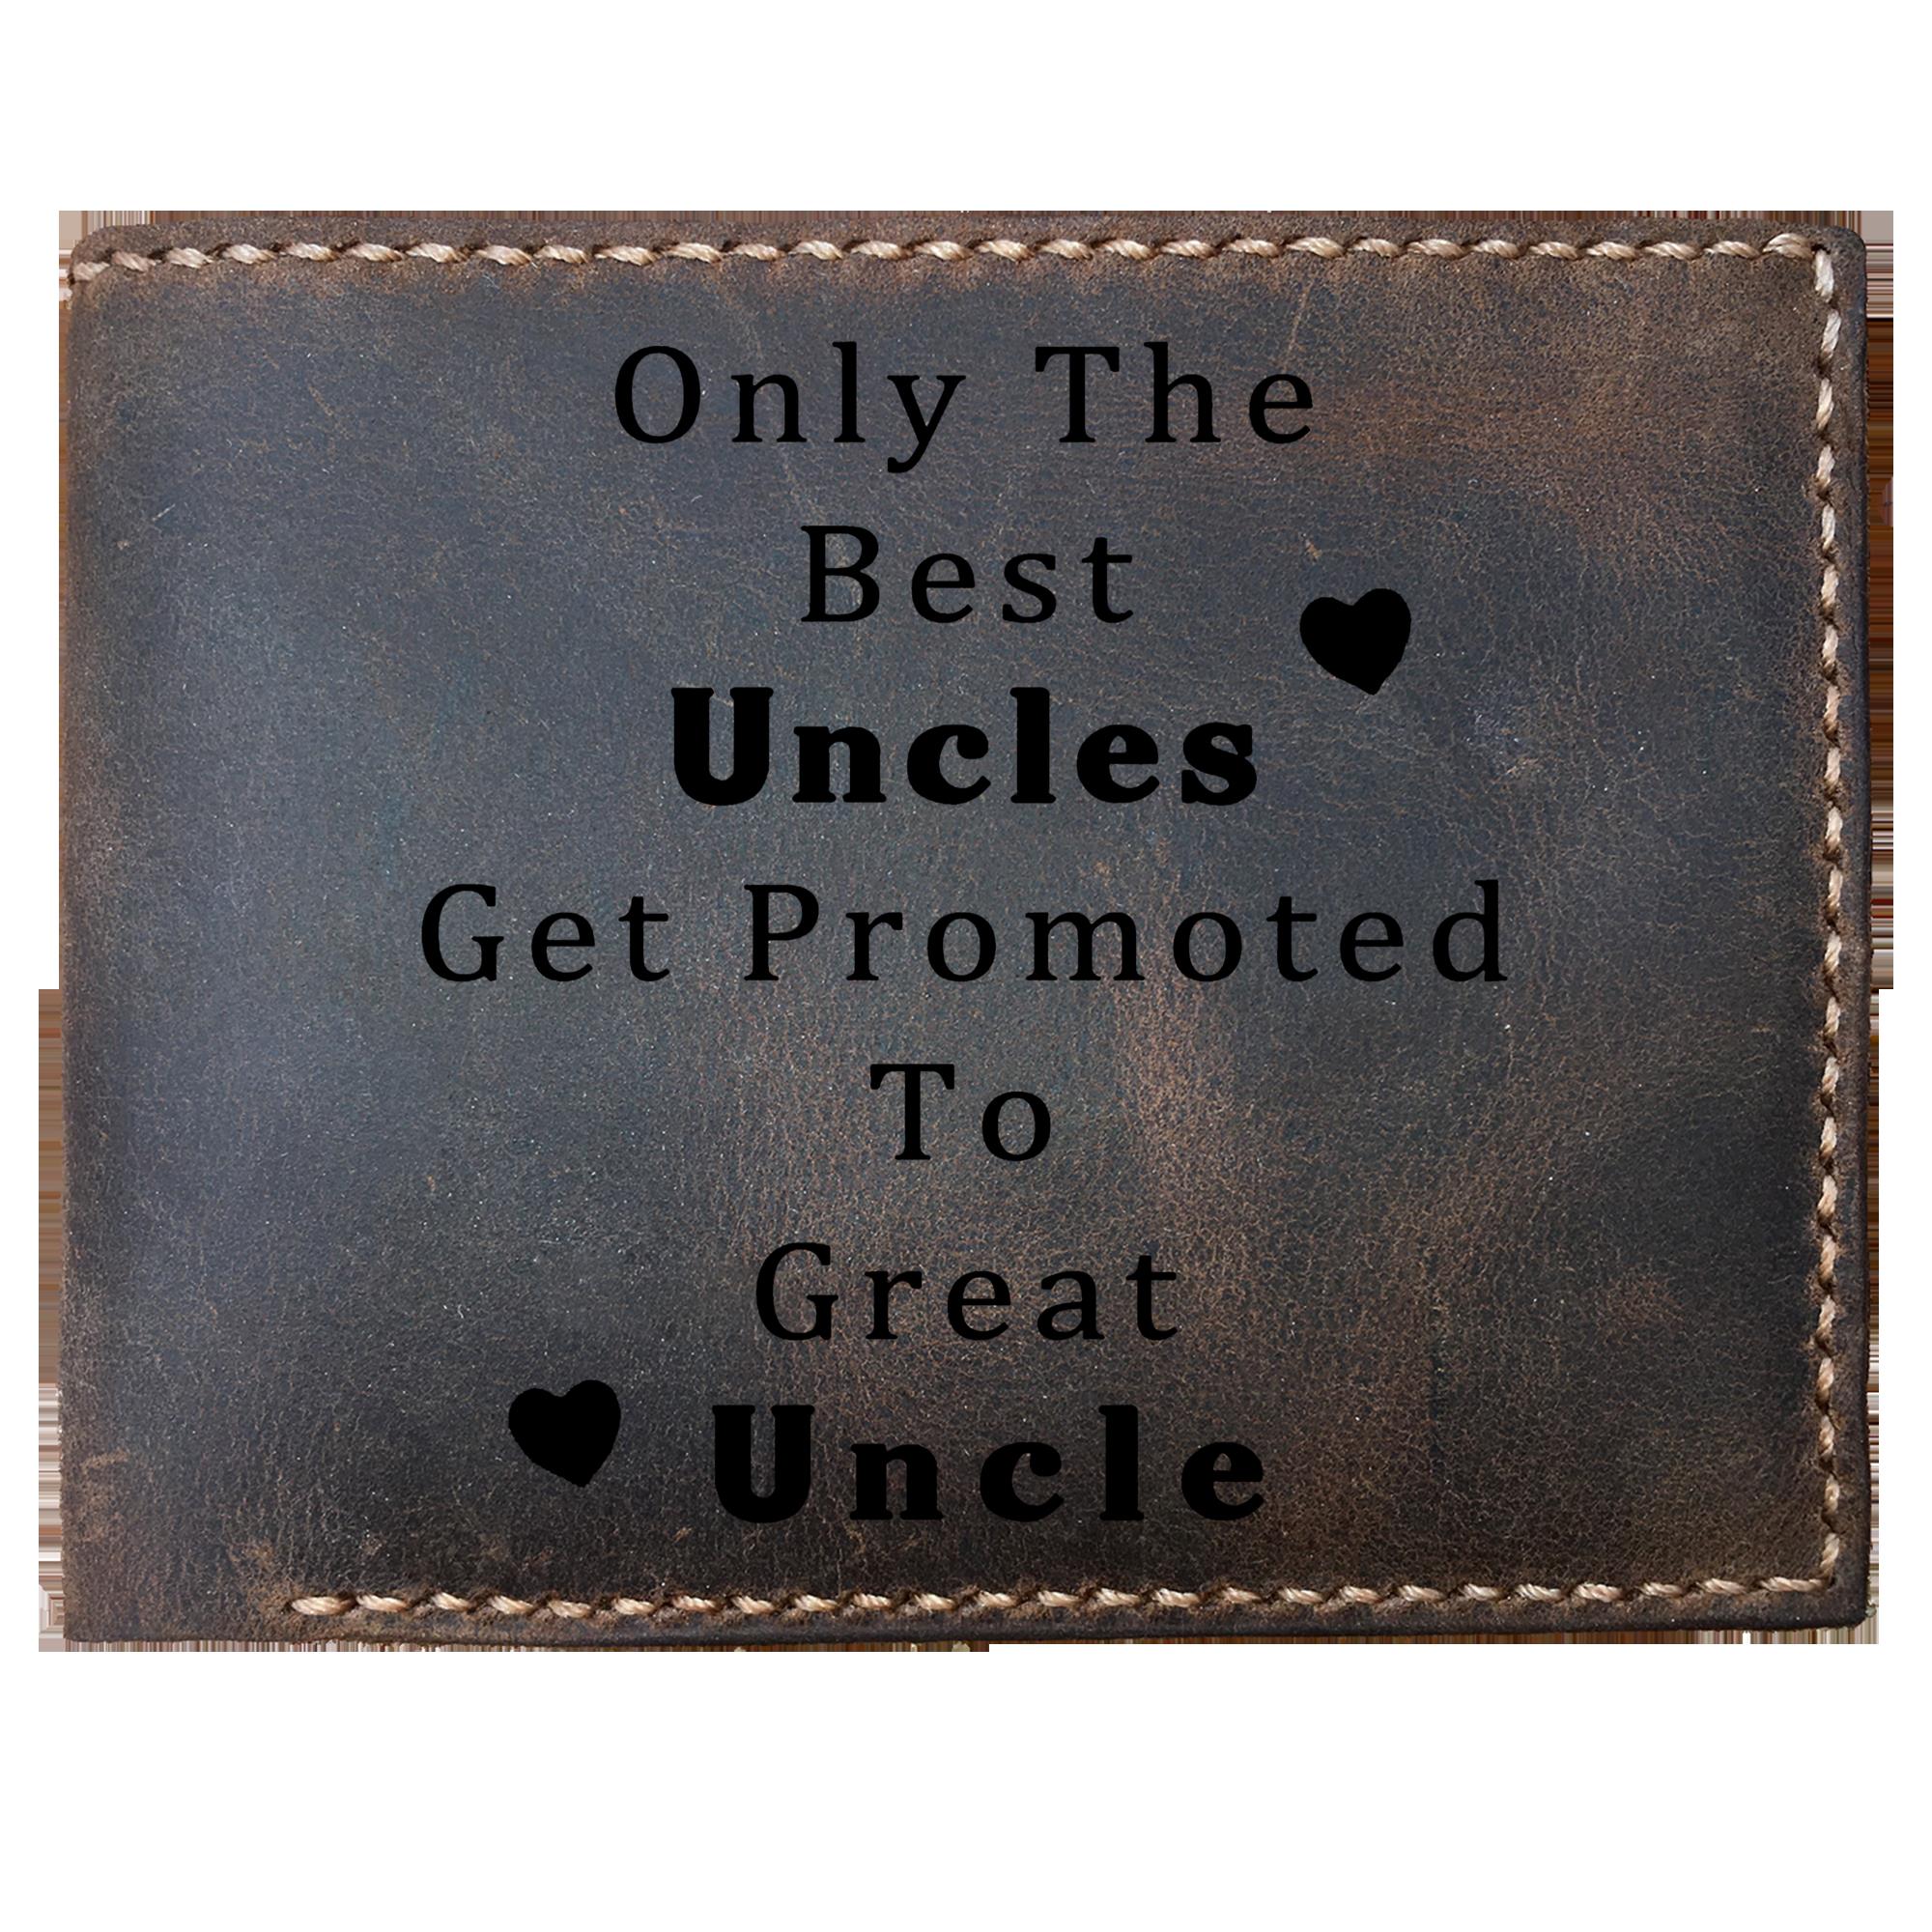 Skitongifts Funny Custom Laser Engraved Bifold Leather Wallet For Men, Only The Best Uncle Get Promoted To Great Uncle